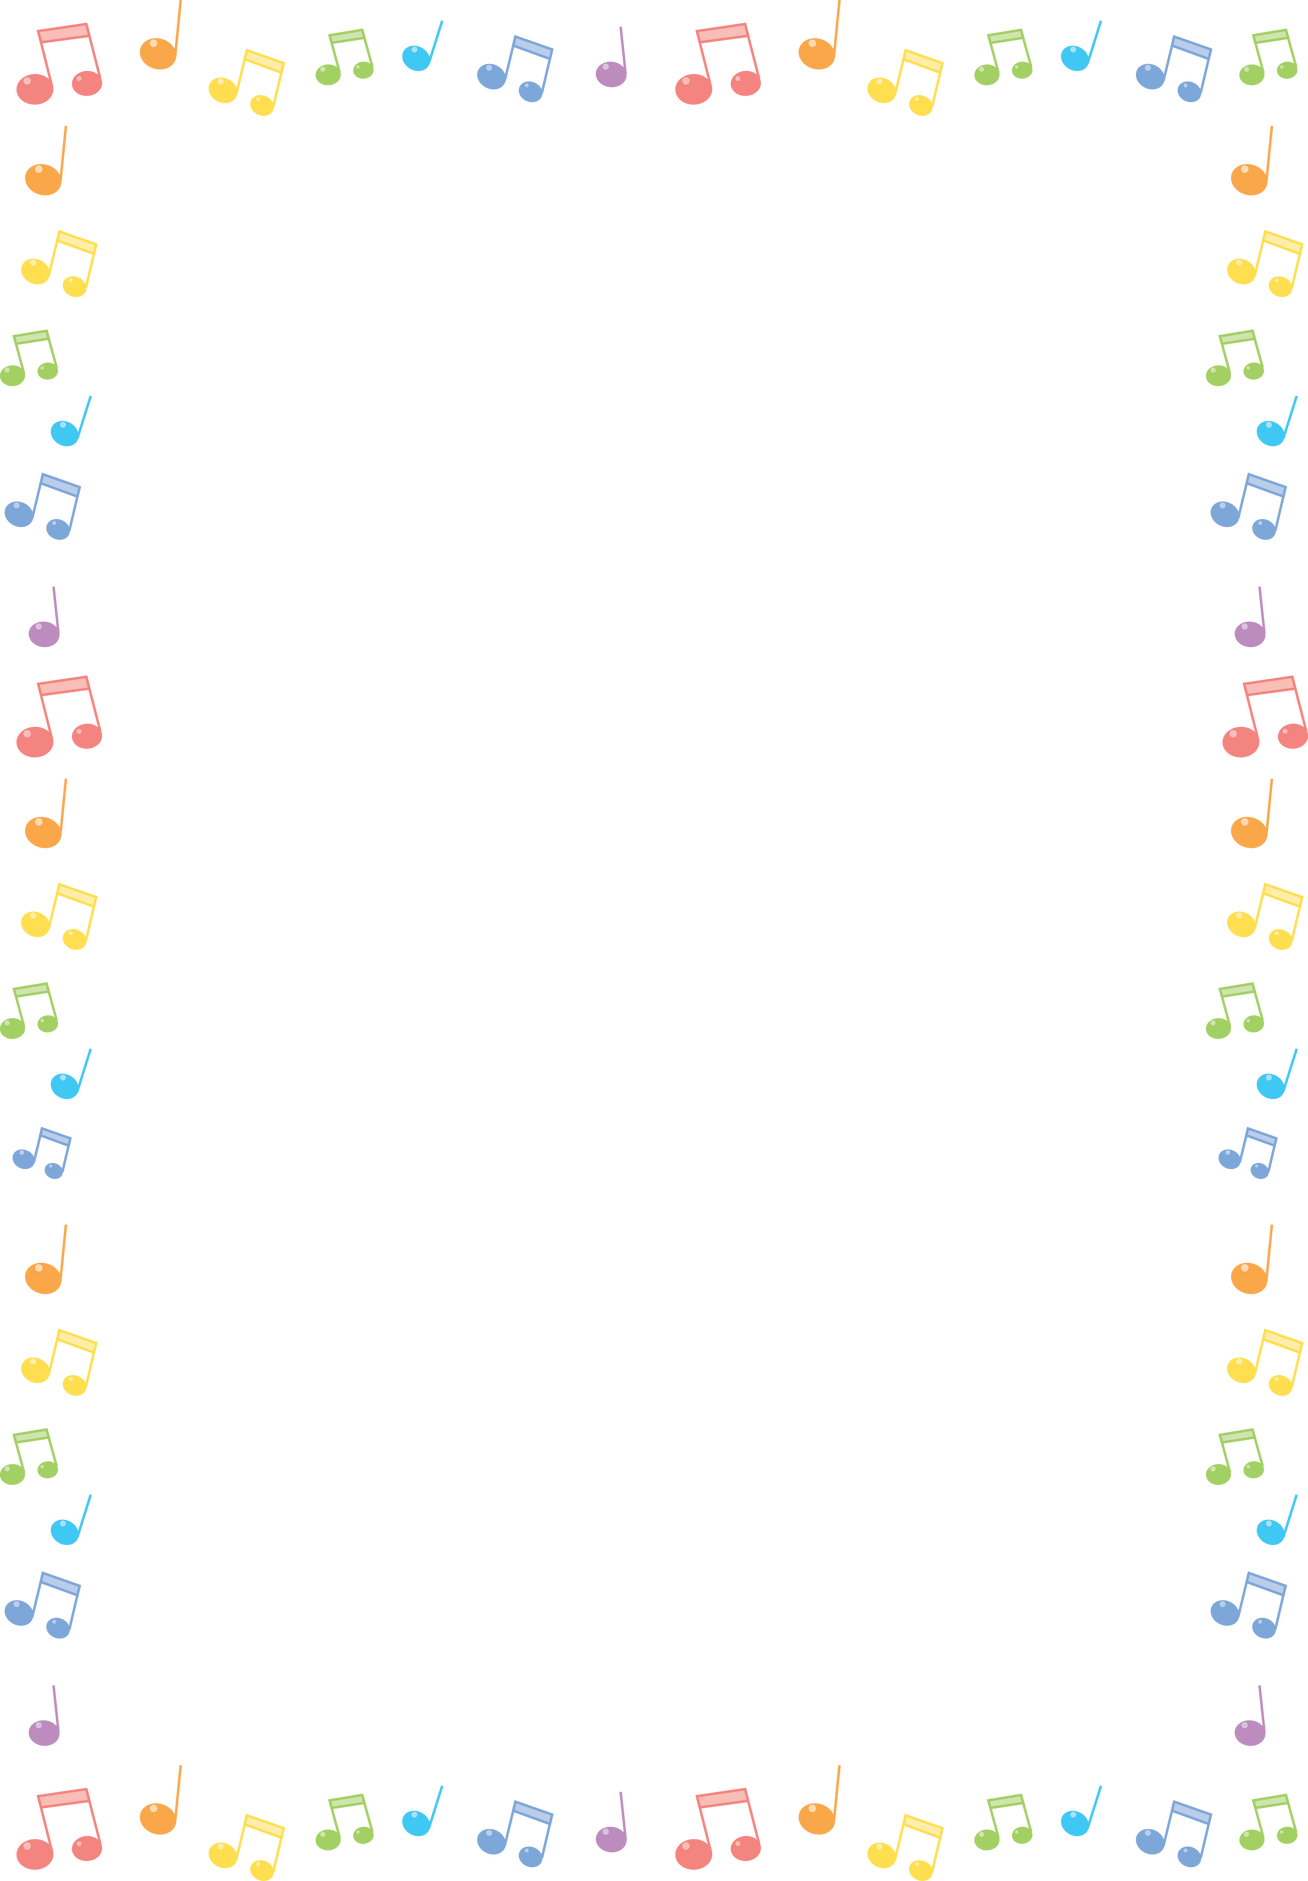 COLORFUL MUSICAL NOTES FRAME